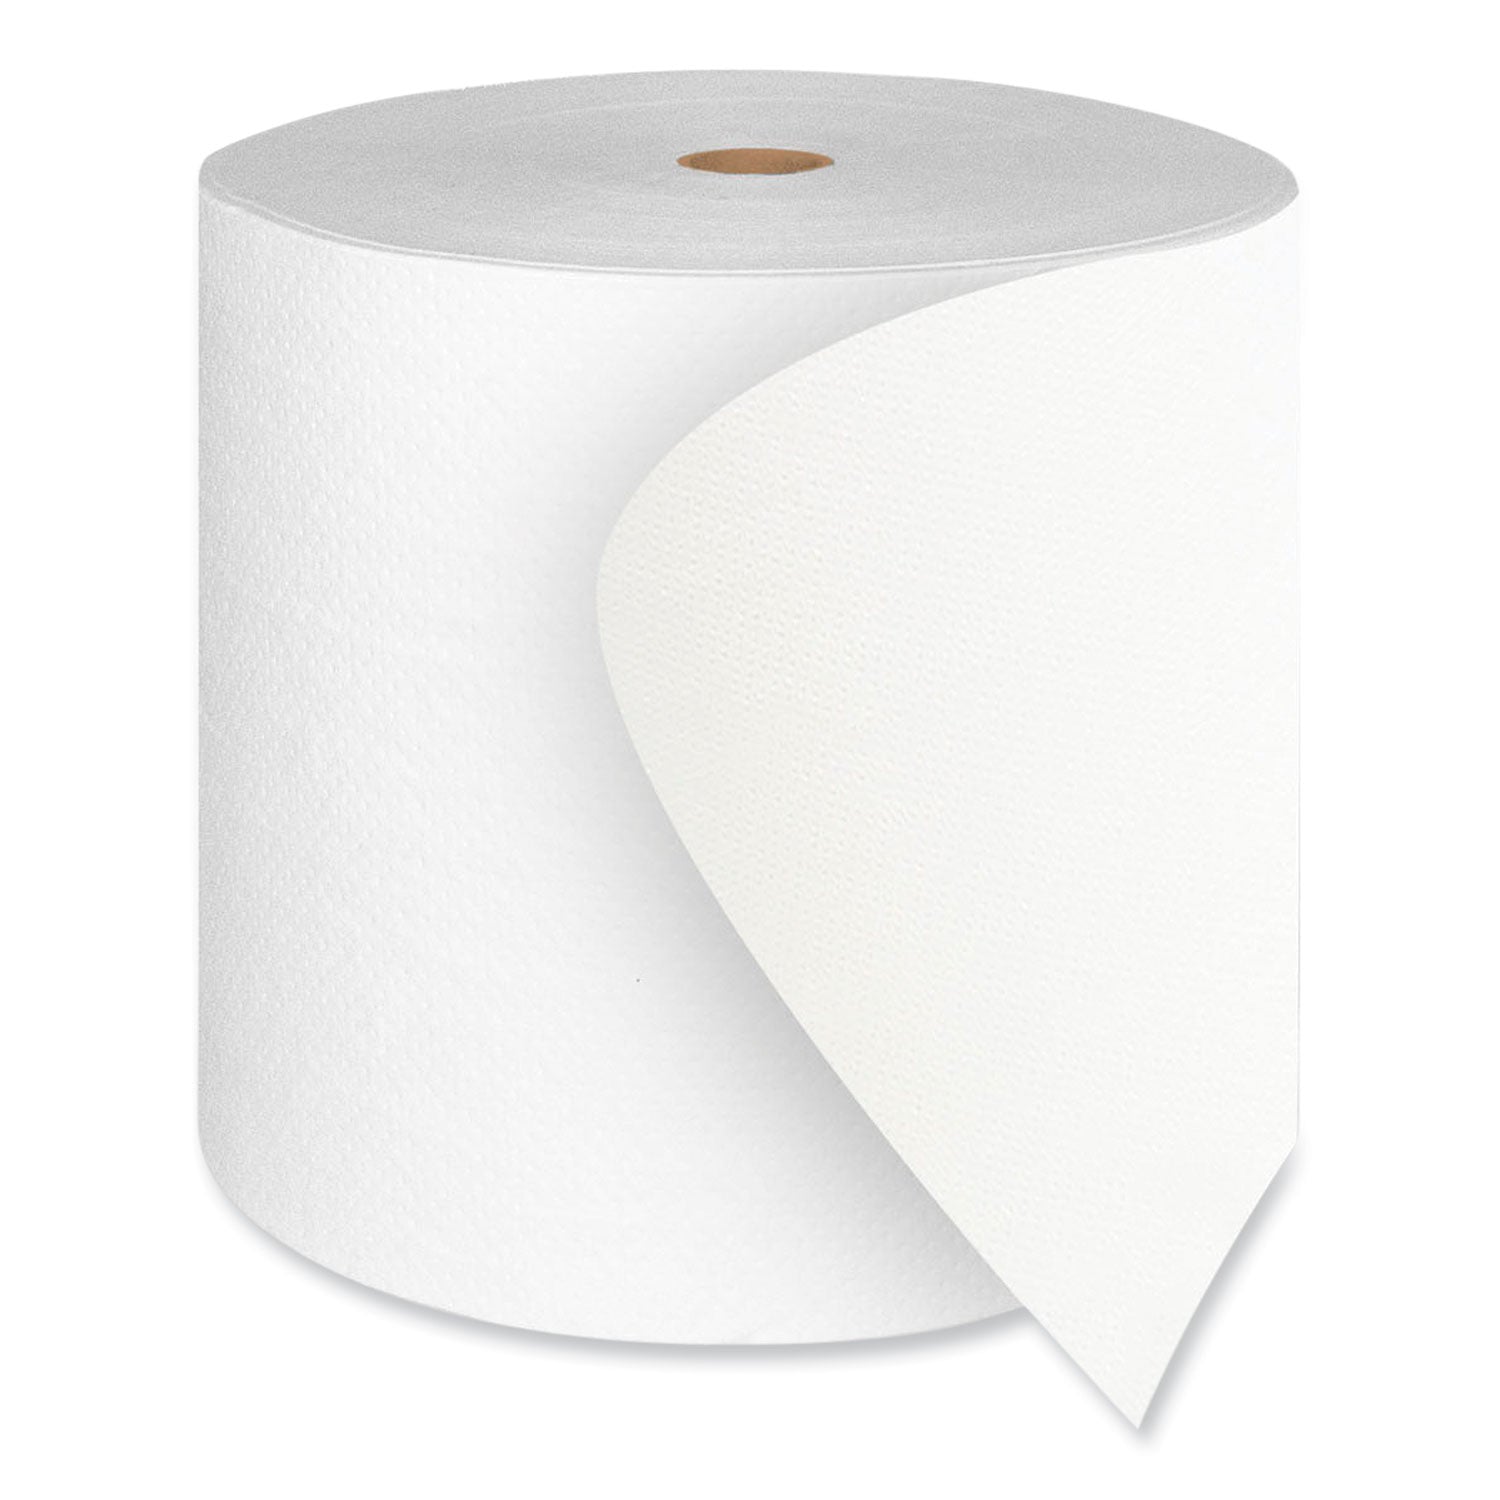 valay-proprietary-roll-towels-1-ply-7-x-800-ft-white-6-rolls-carton_morvw444 - 1